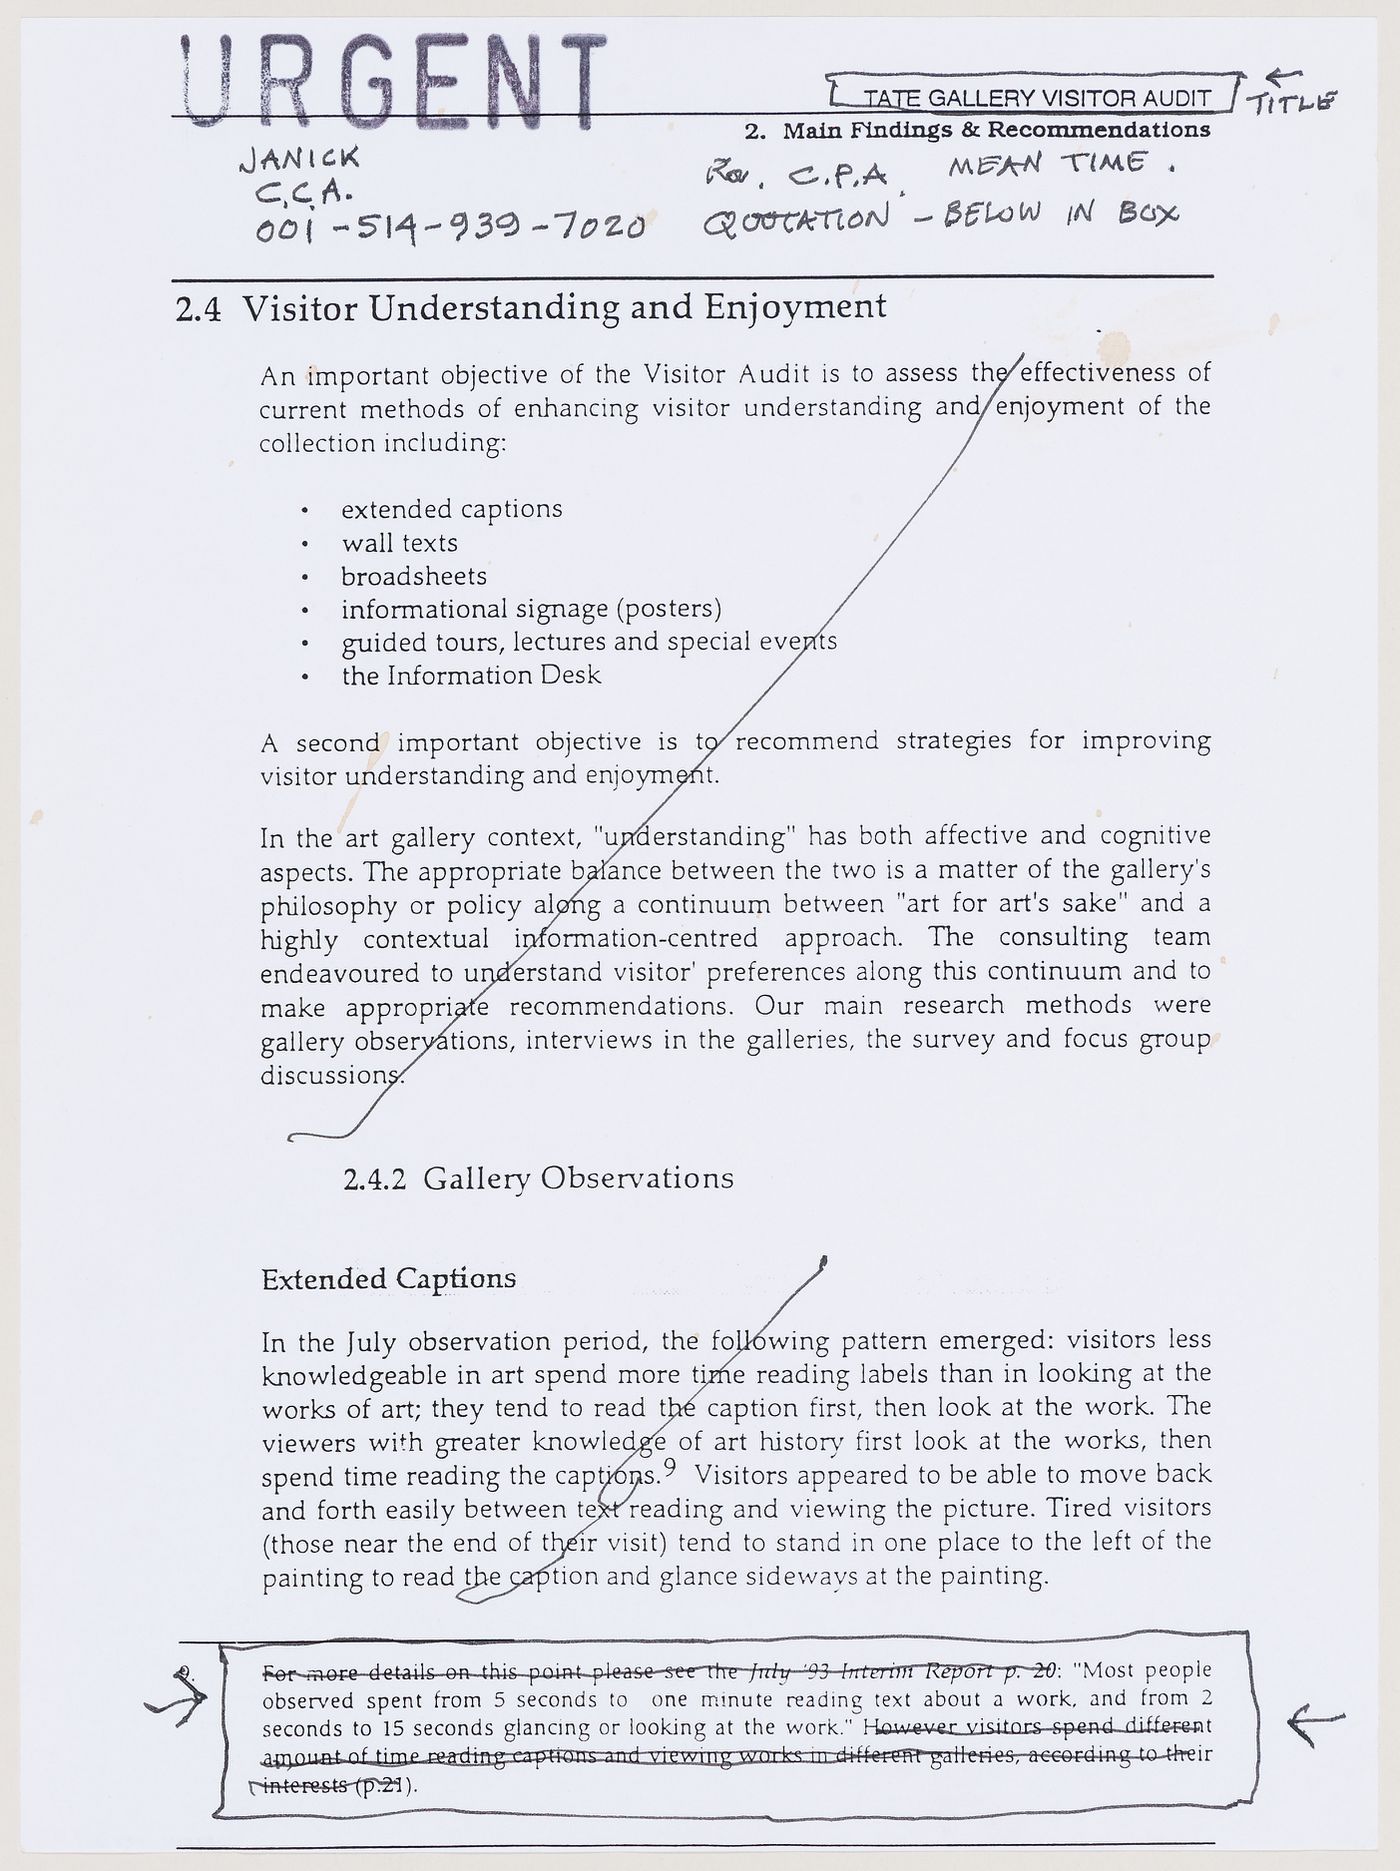 Annotated copy of a Tate Gallery Visitor Audit (document from Mean project records)